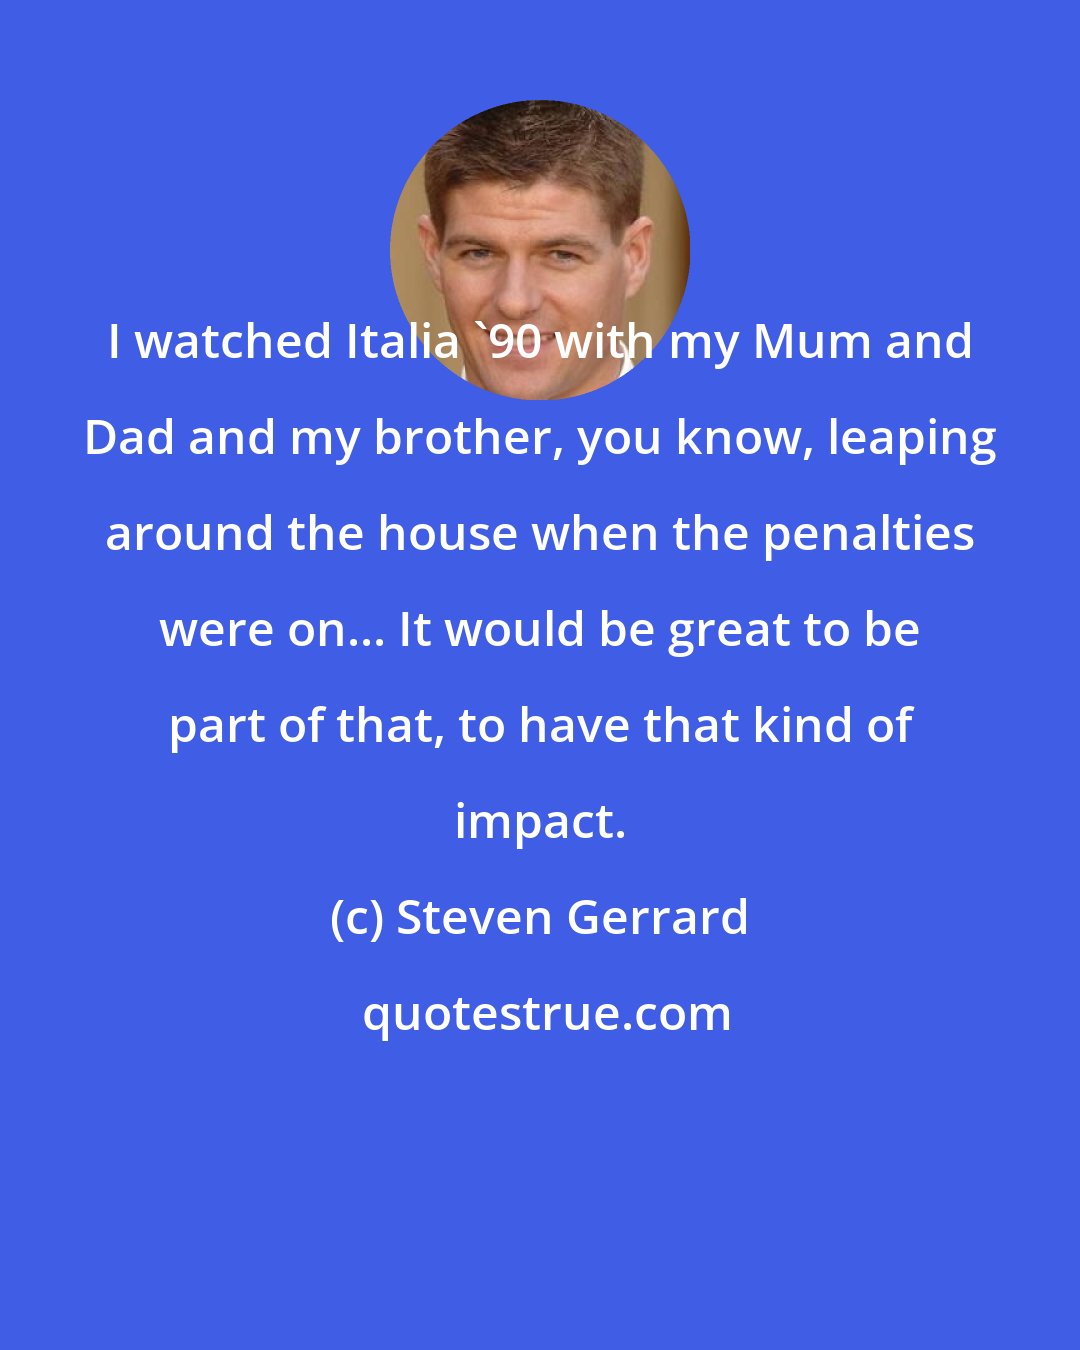 Steven Gerrard: I watched Italia '90 with my Mum and Dad and my brother, you know, leaping around the house when the penalties were on... It would be great to be part of that, to have that kind of impact.